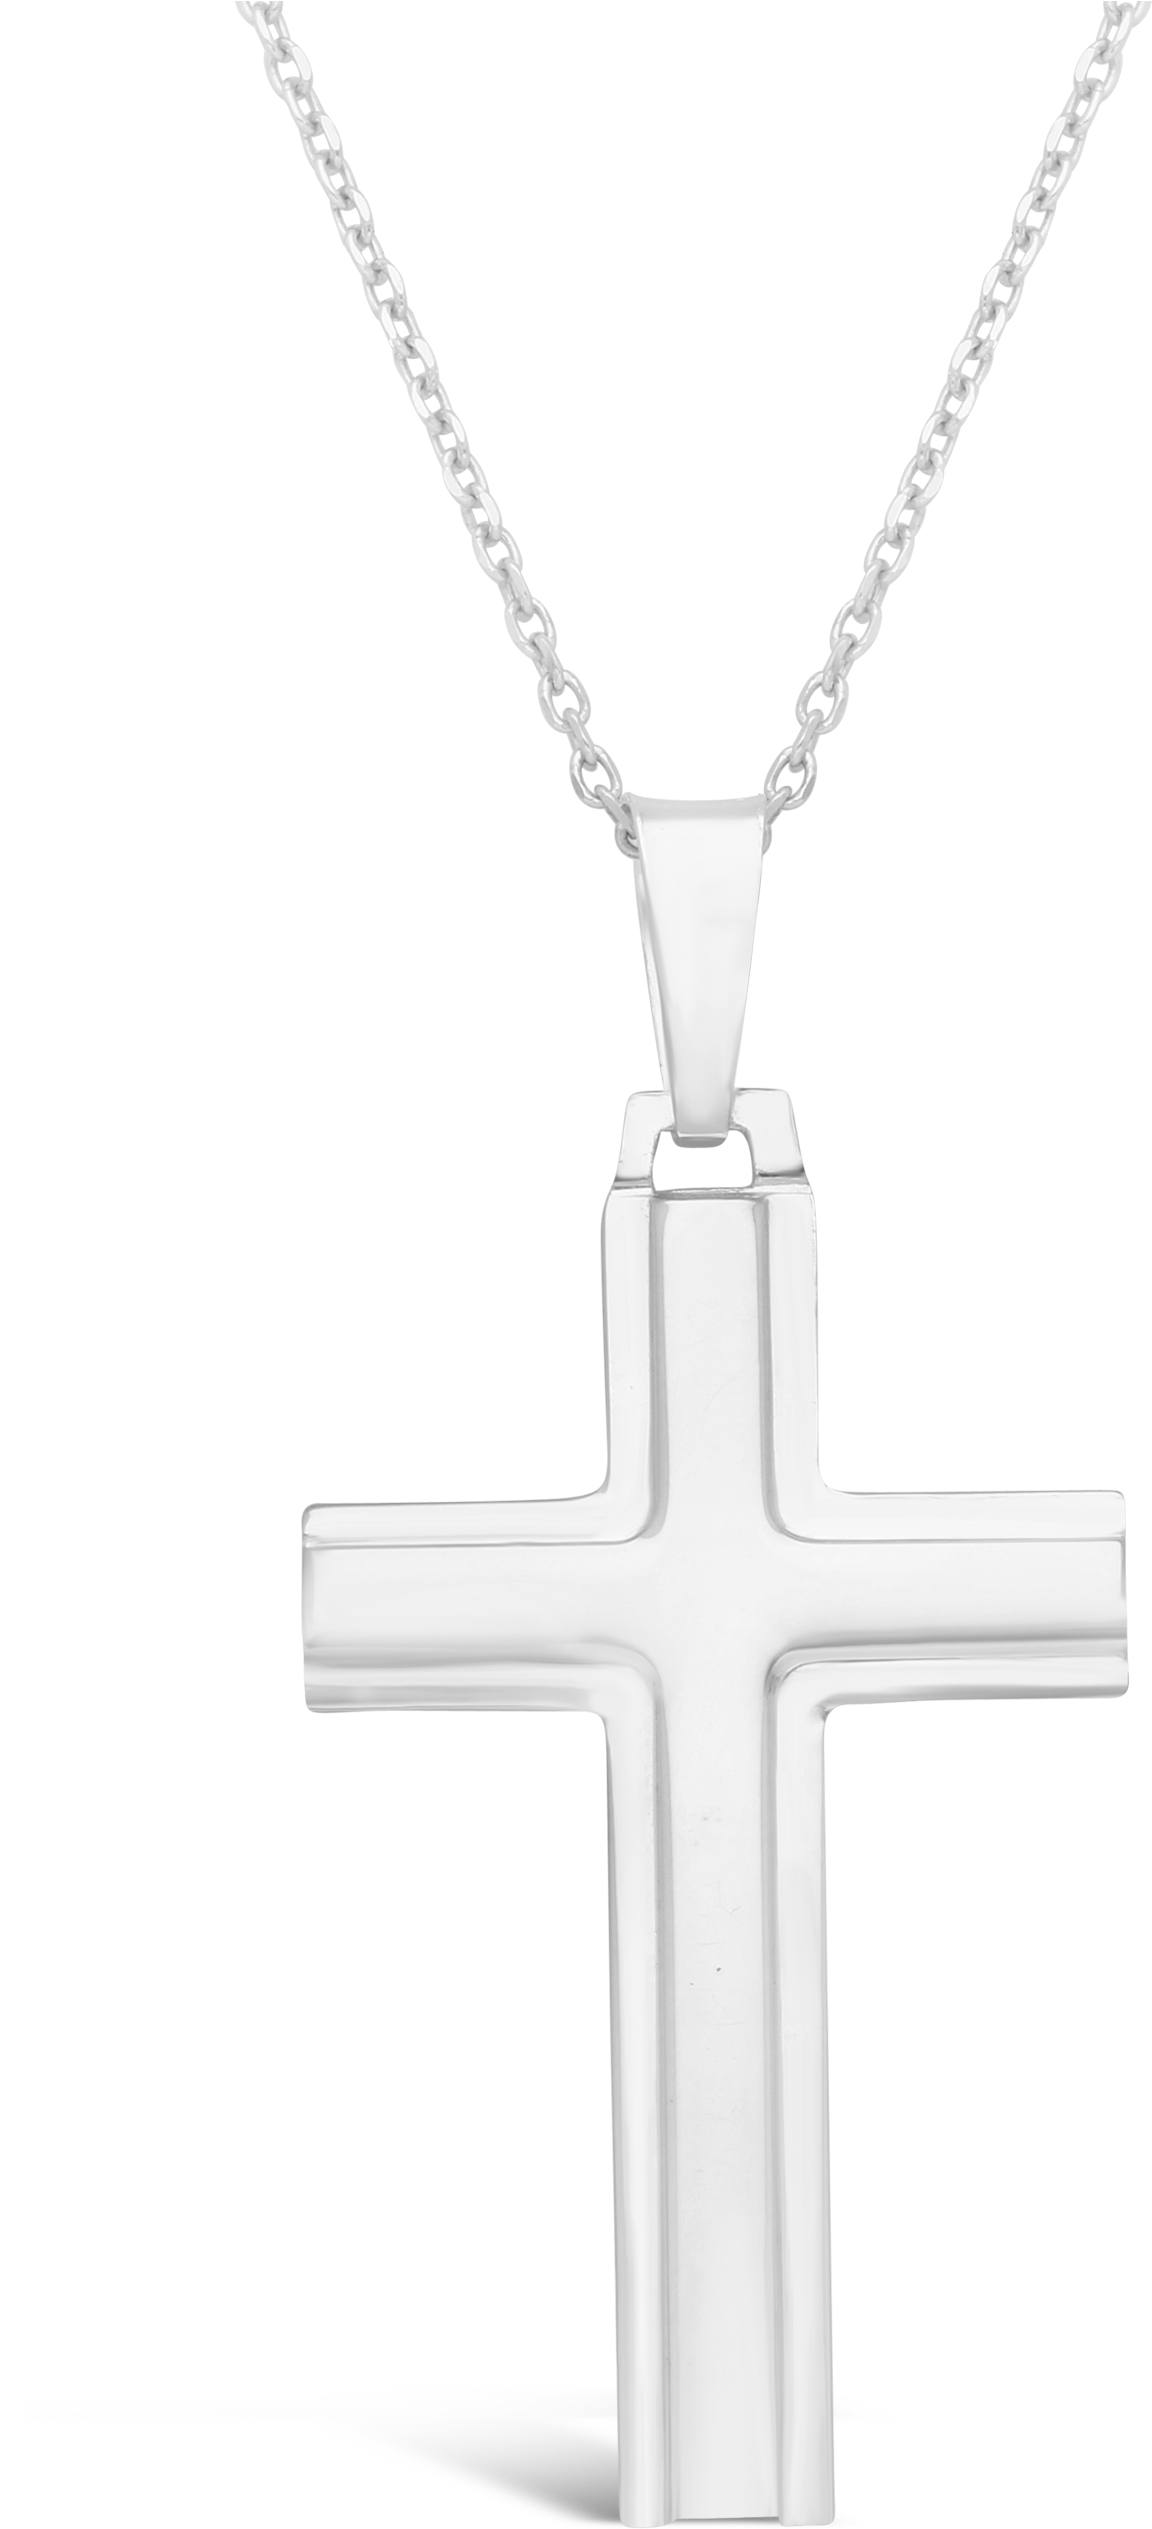 Cross Necklace Png - Locket (3000x3000), Png Download